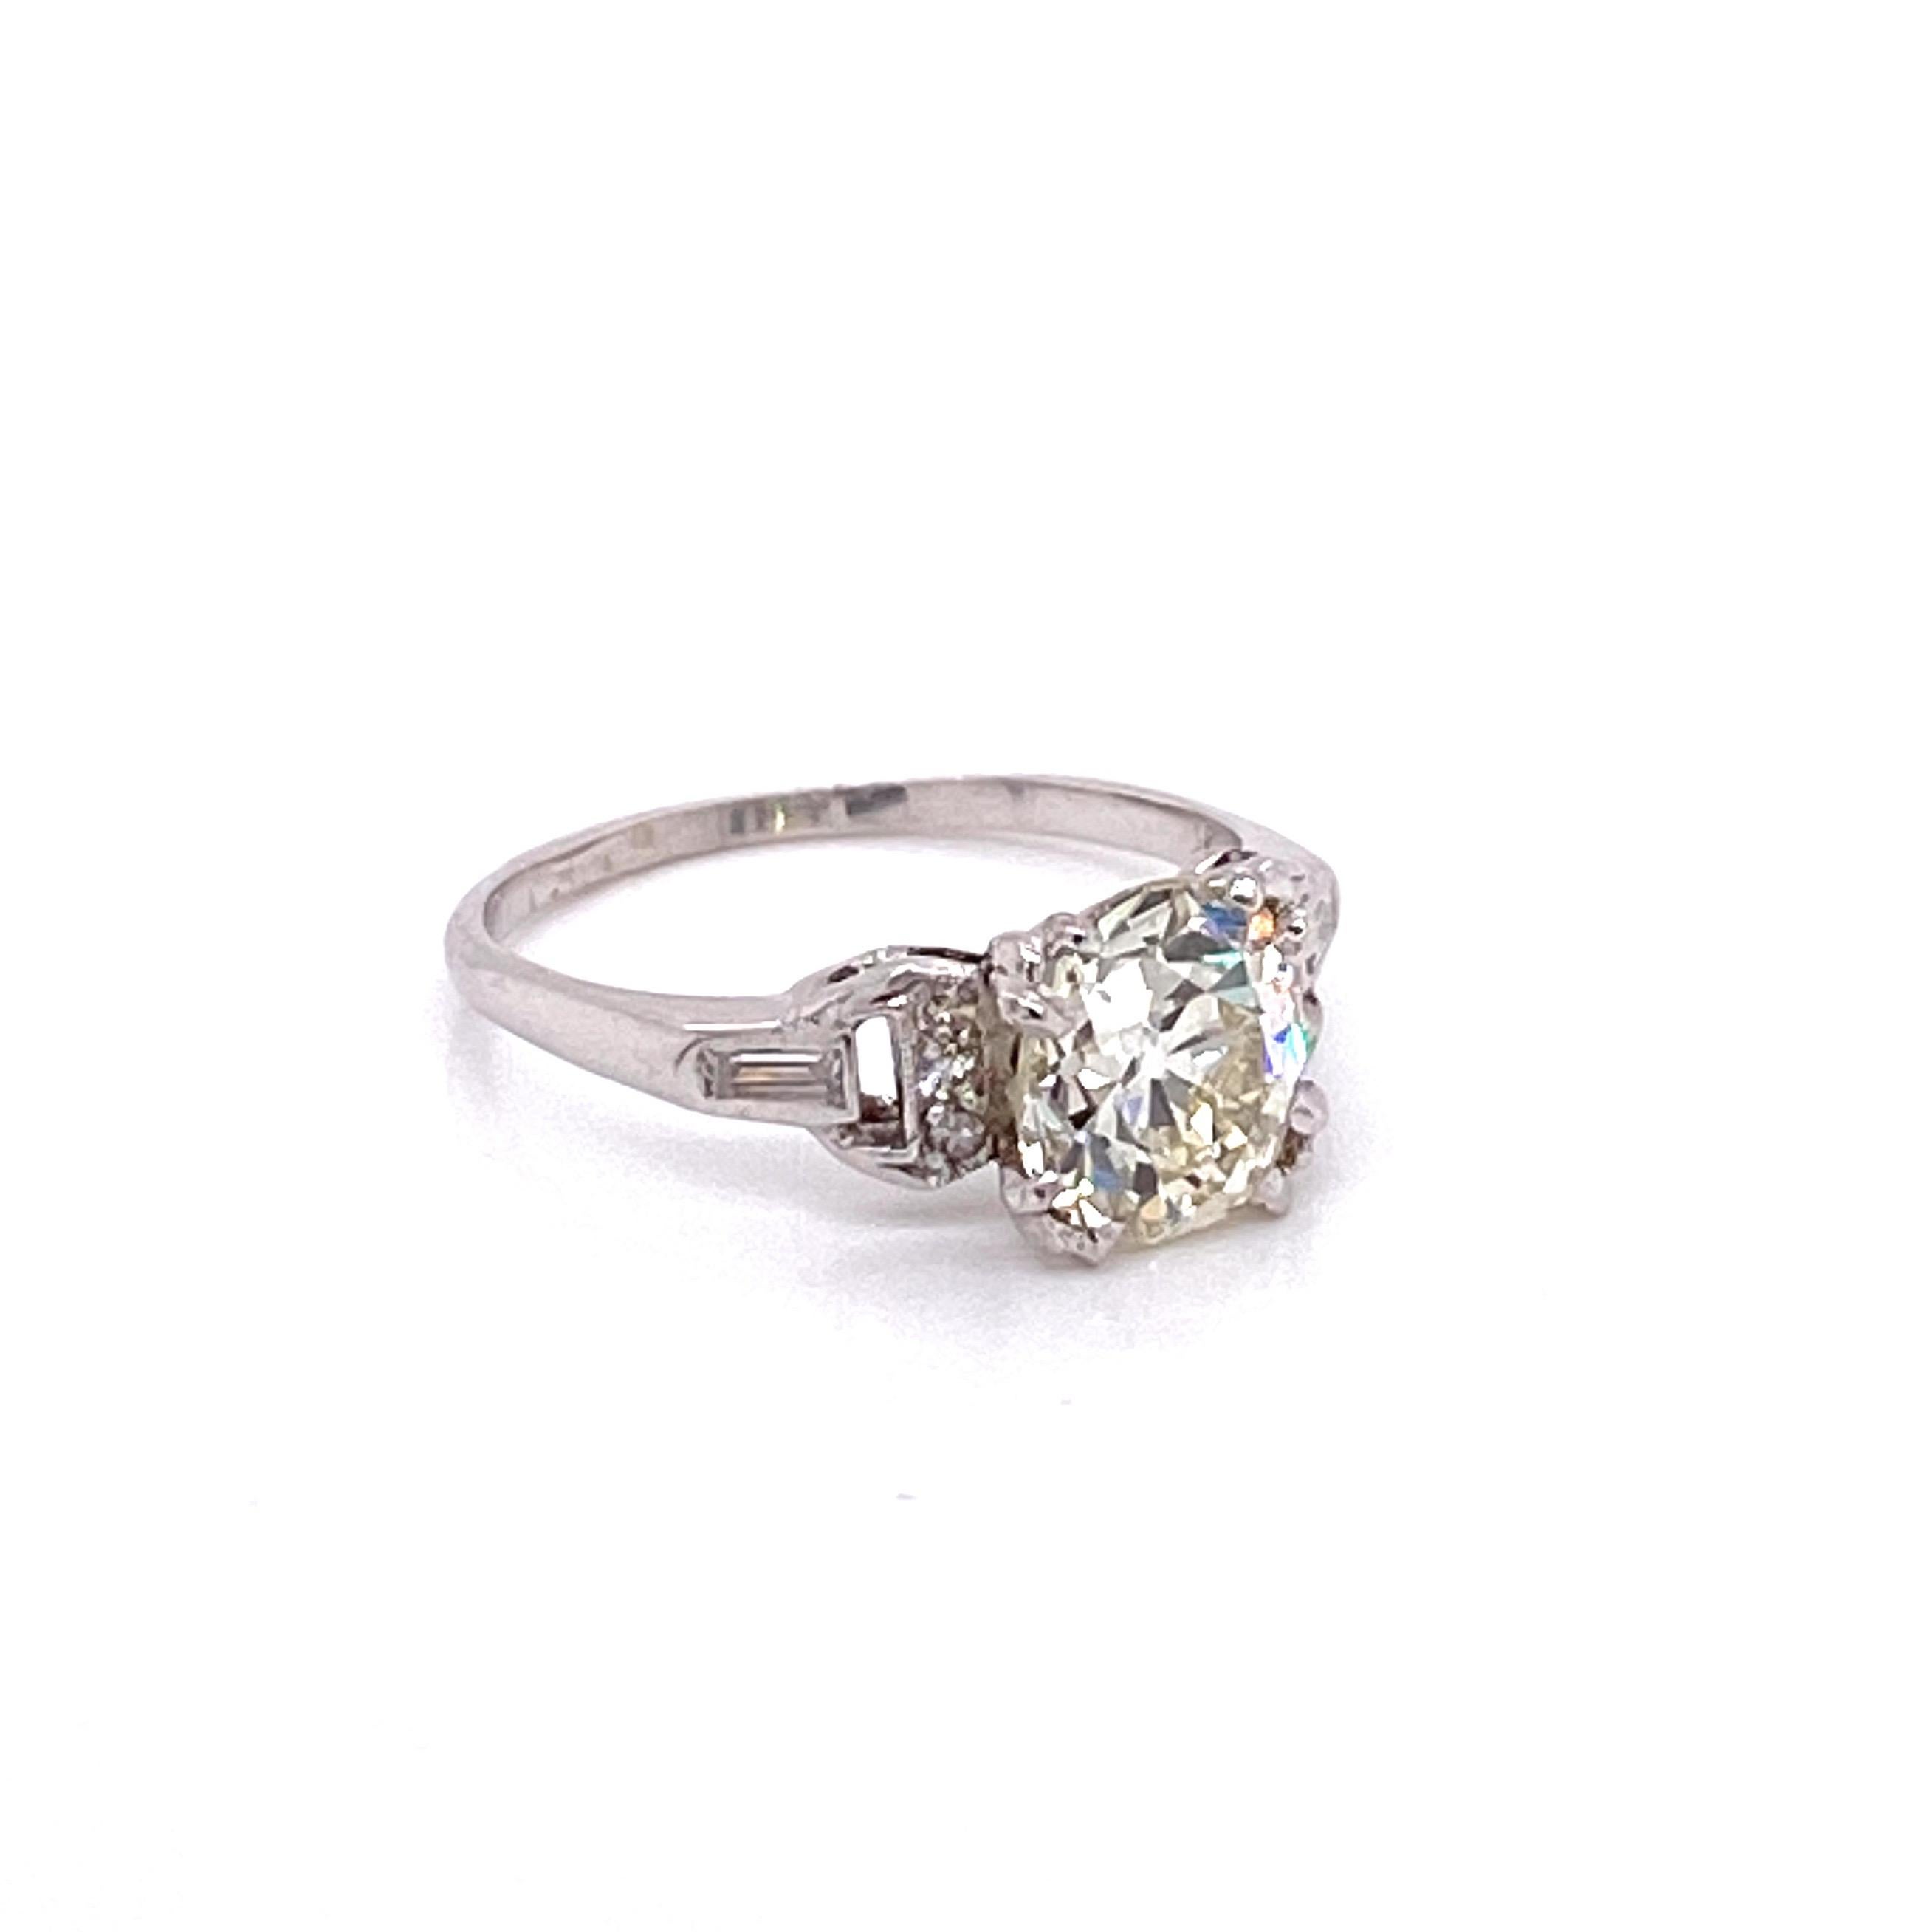 Vintage 1930s Old Mine Cut Diamond Art Deco Engagement Ring - The center Old Mine cut diamond weighs 1.83ct with M color and VS2 clarity. The diamond sits low in a platinum fishtail head. On either side of the Art Deco setting are 3 single cut